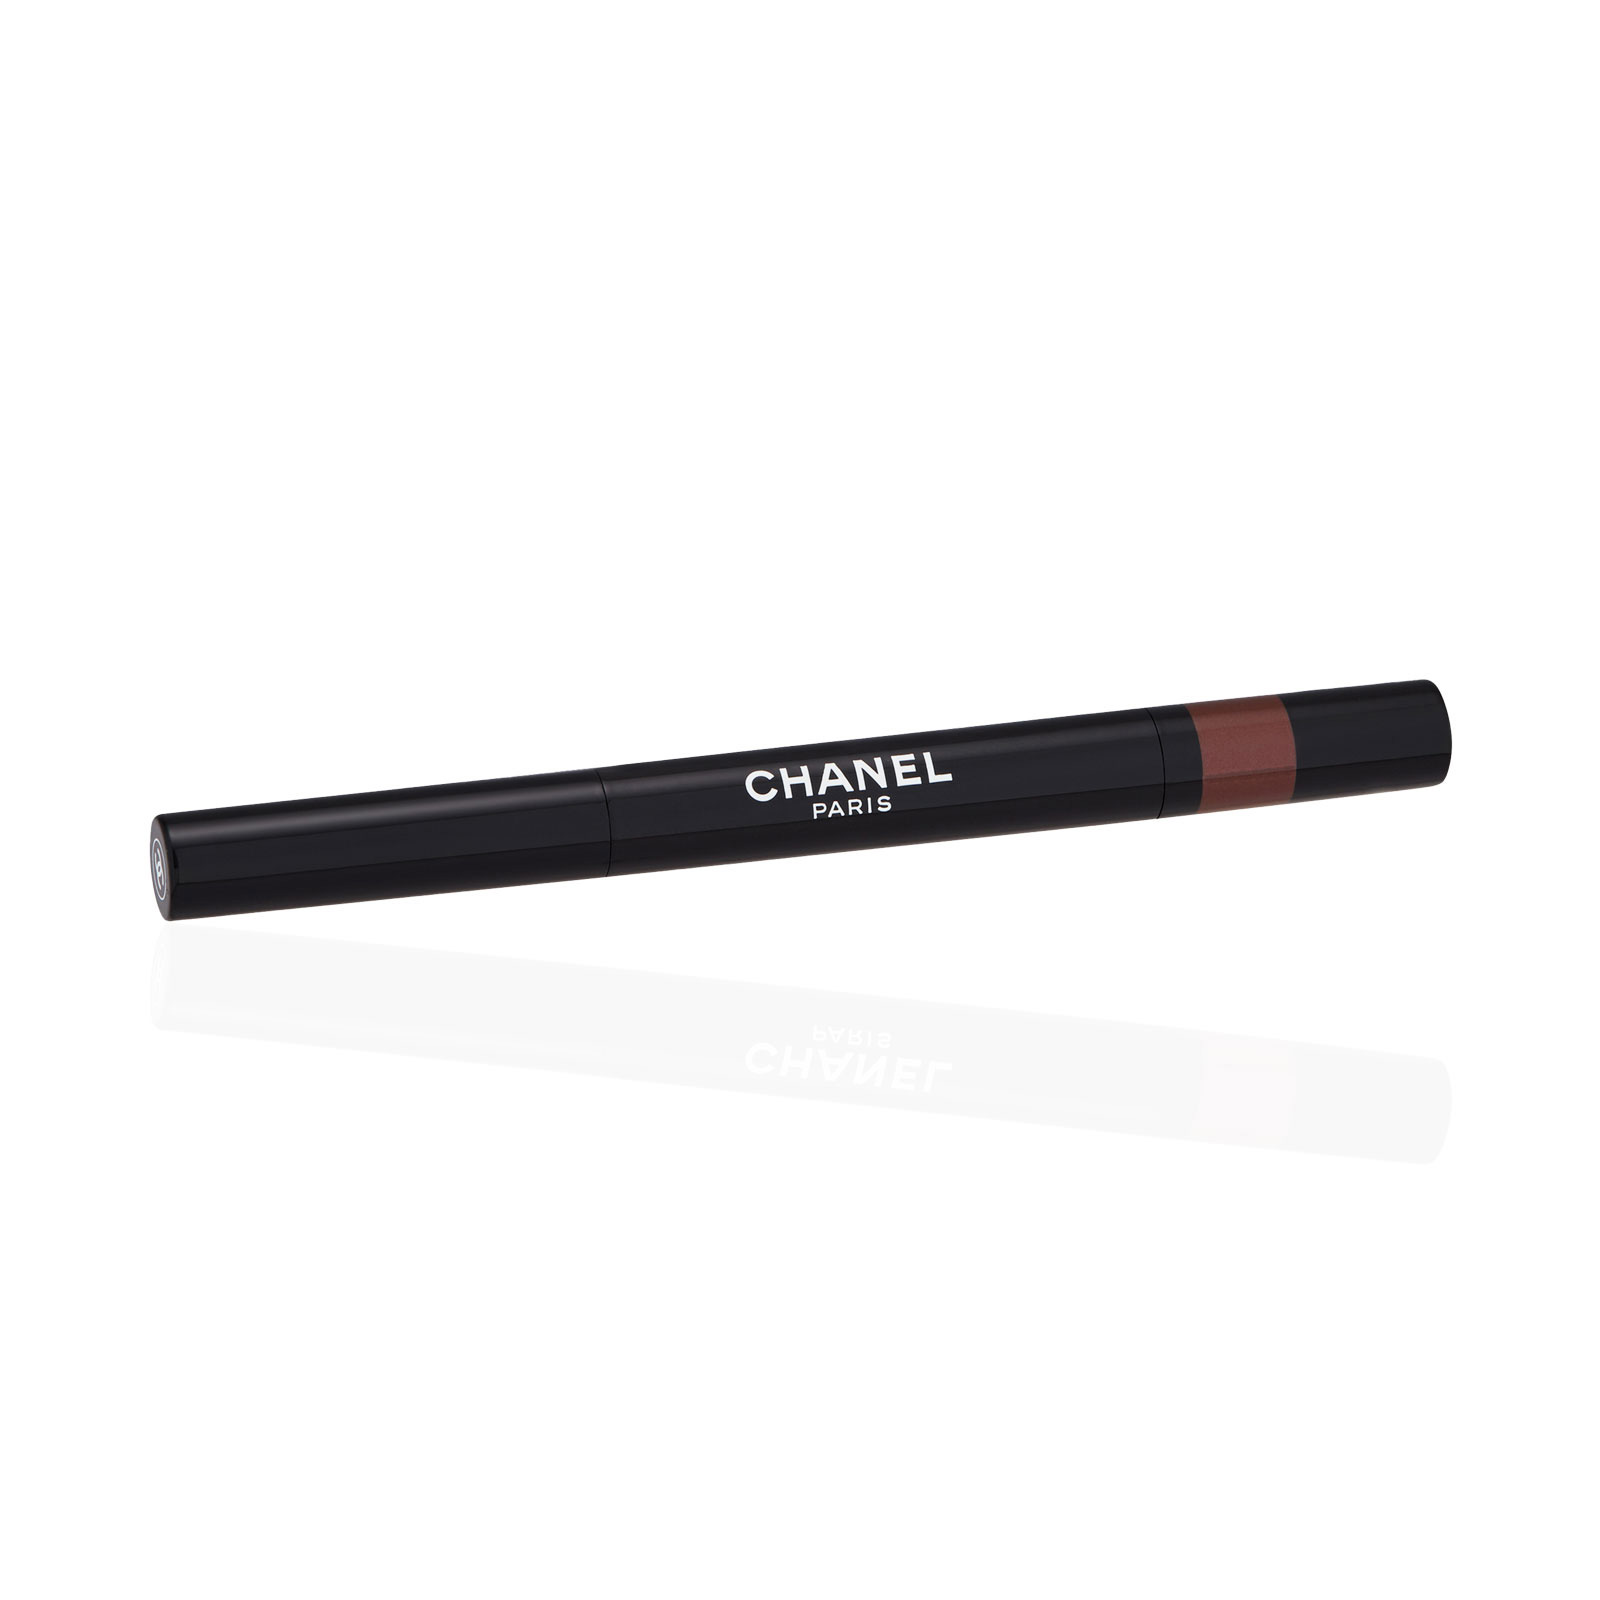 Chanel Stylo Ombre Et Contour Eyeshadow Liner - Kohl0.8 g 0.02 oz AKB Beauty